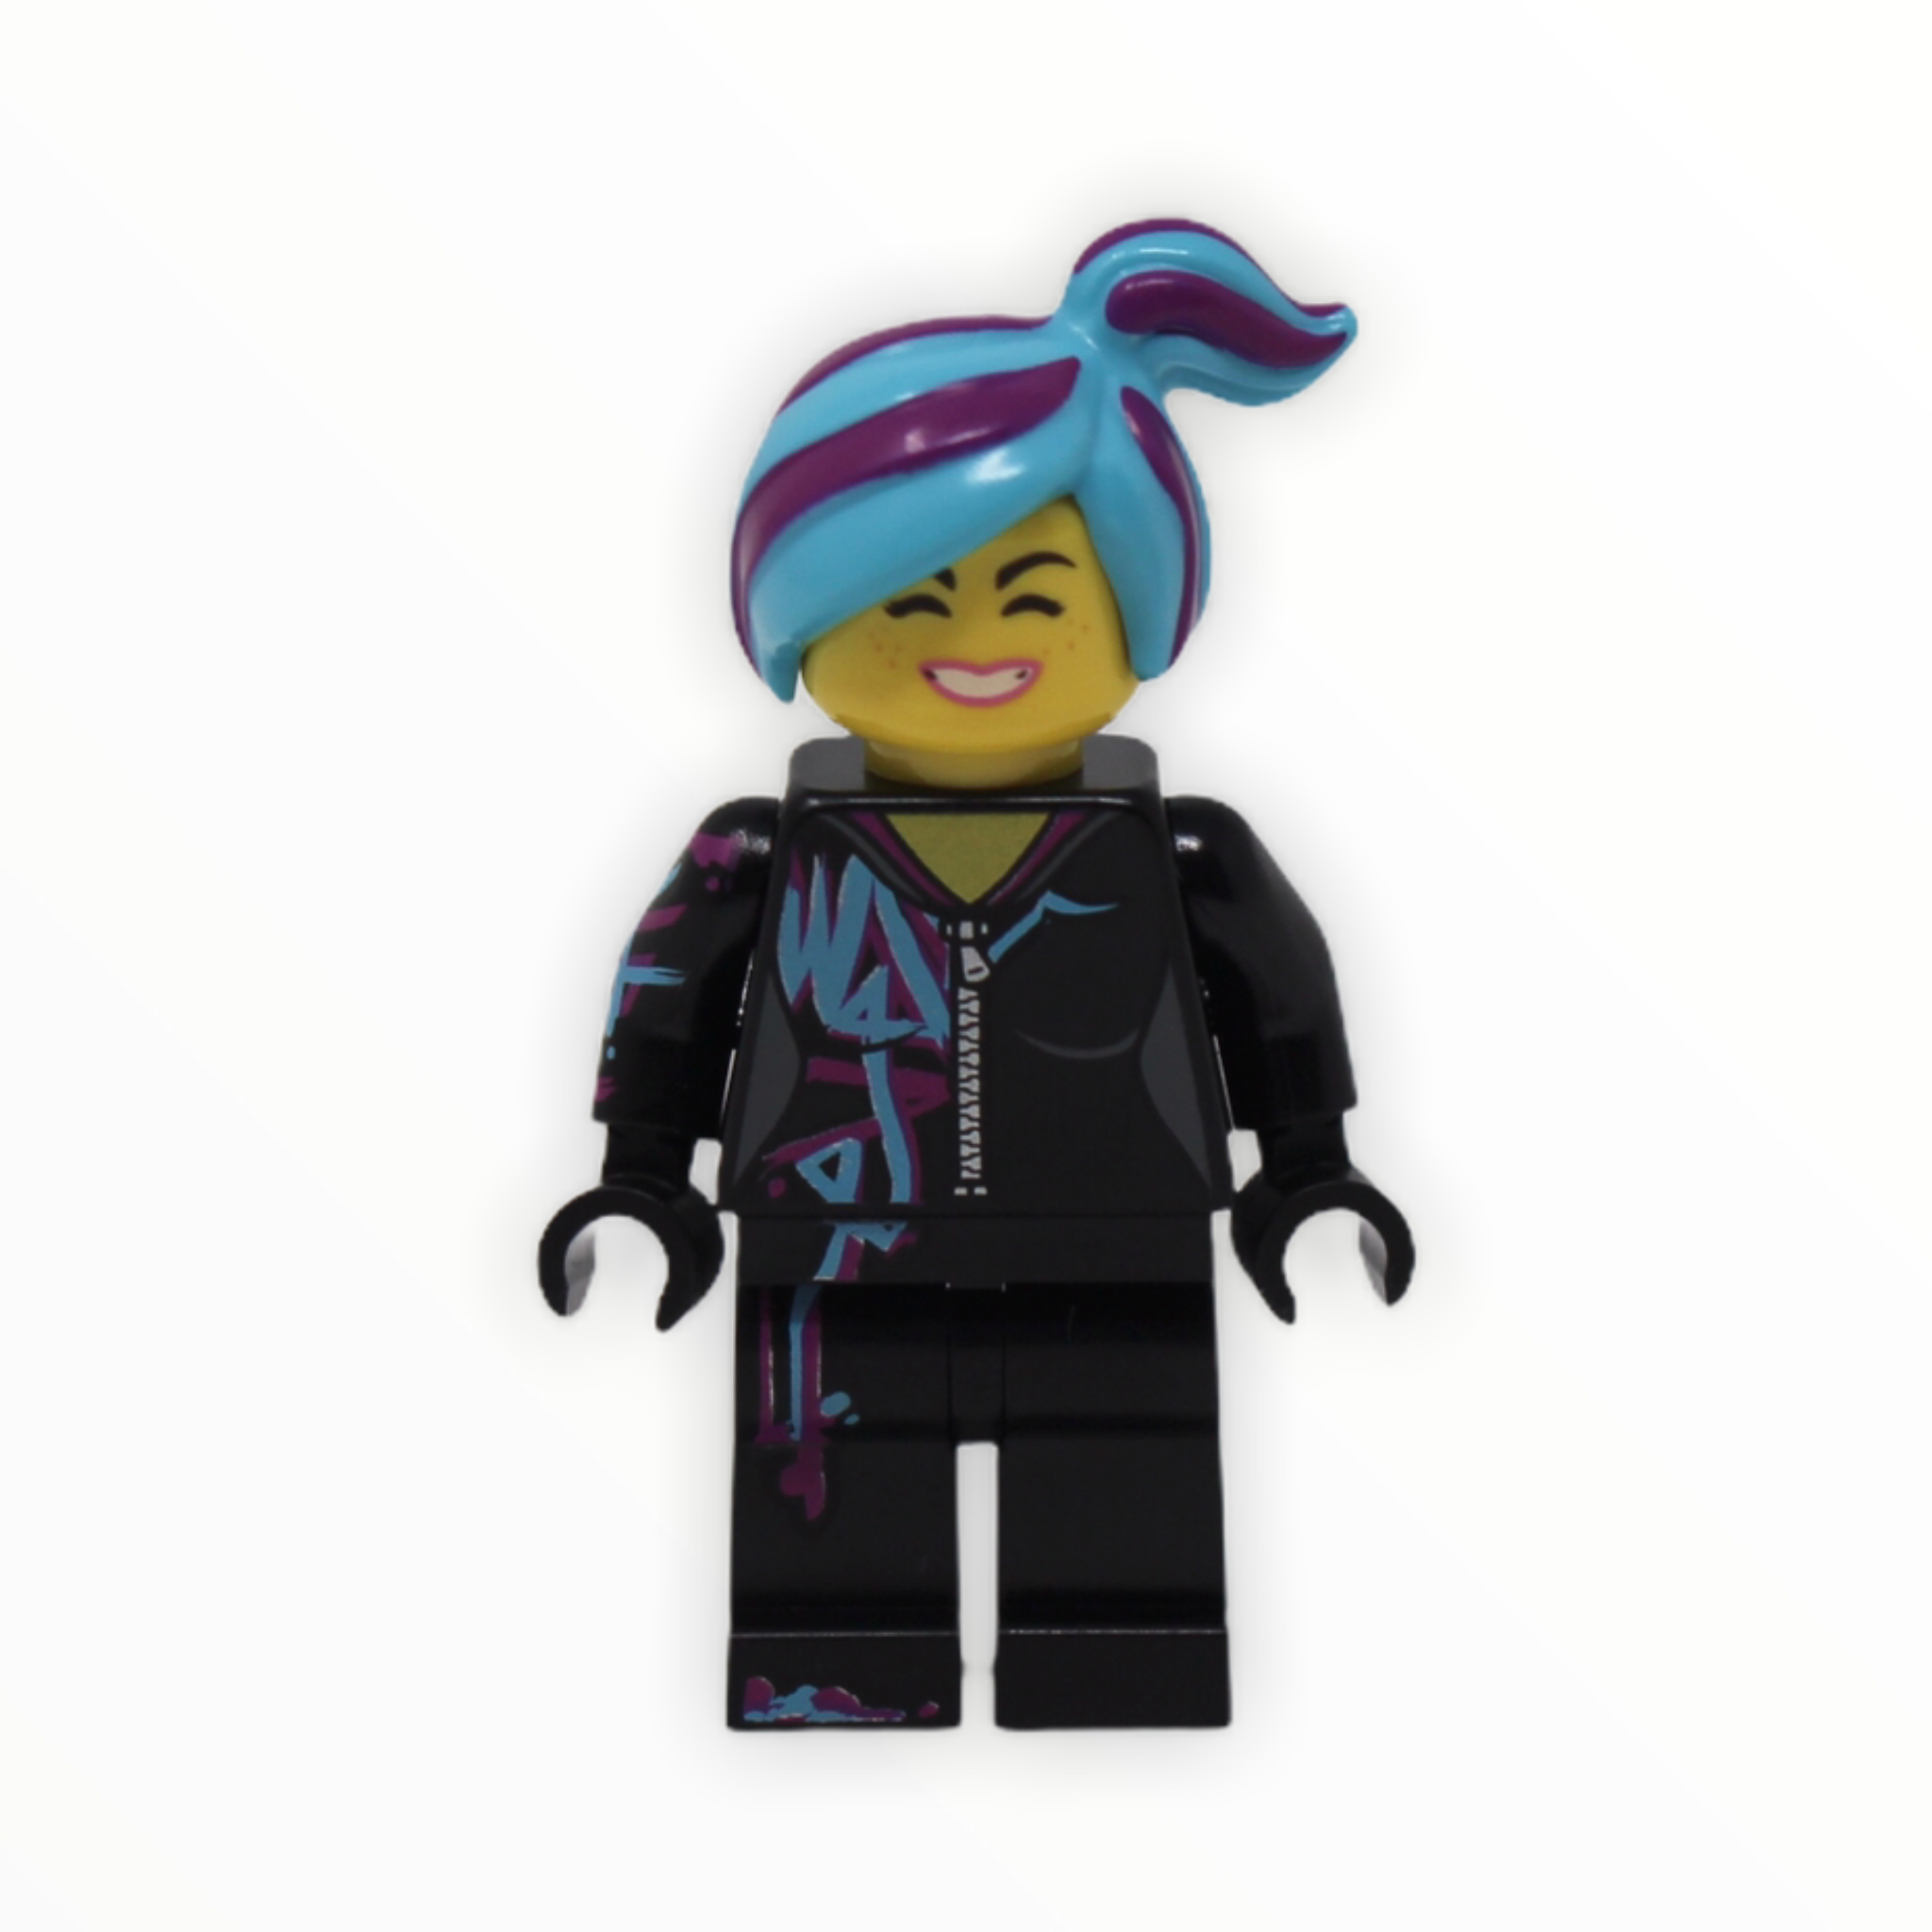 Lucy Wyldstyle (magenta lined hoodie, azure hair, smile / cheerful)